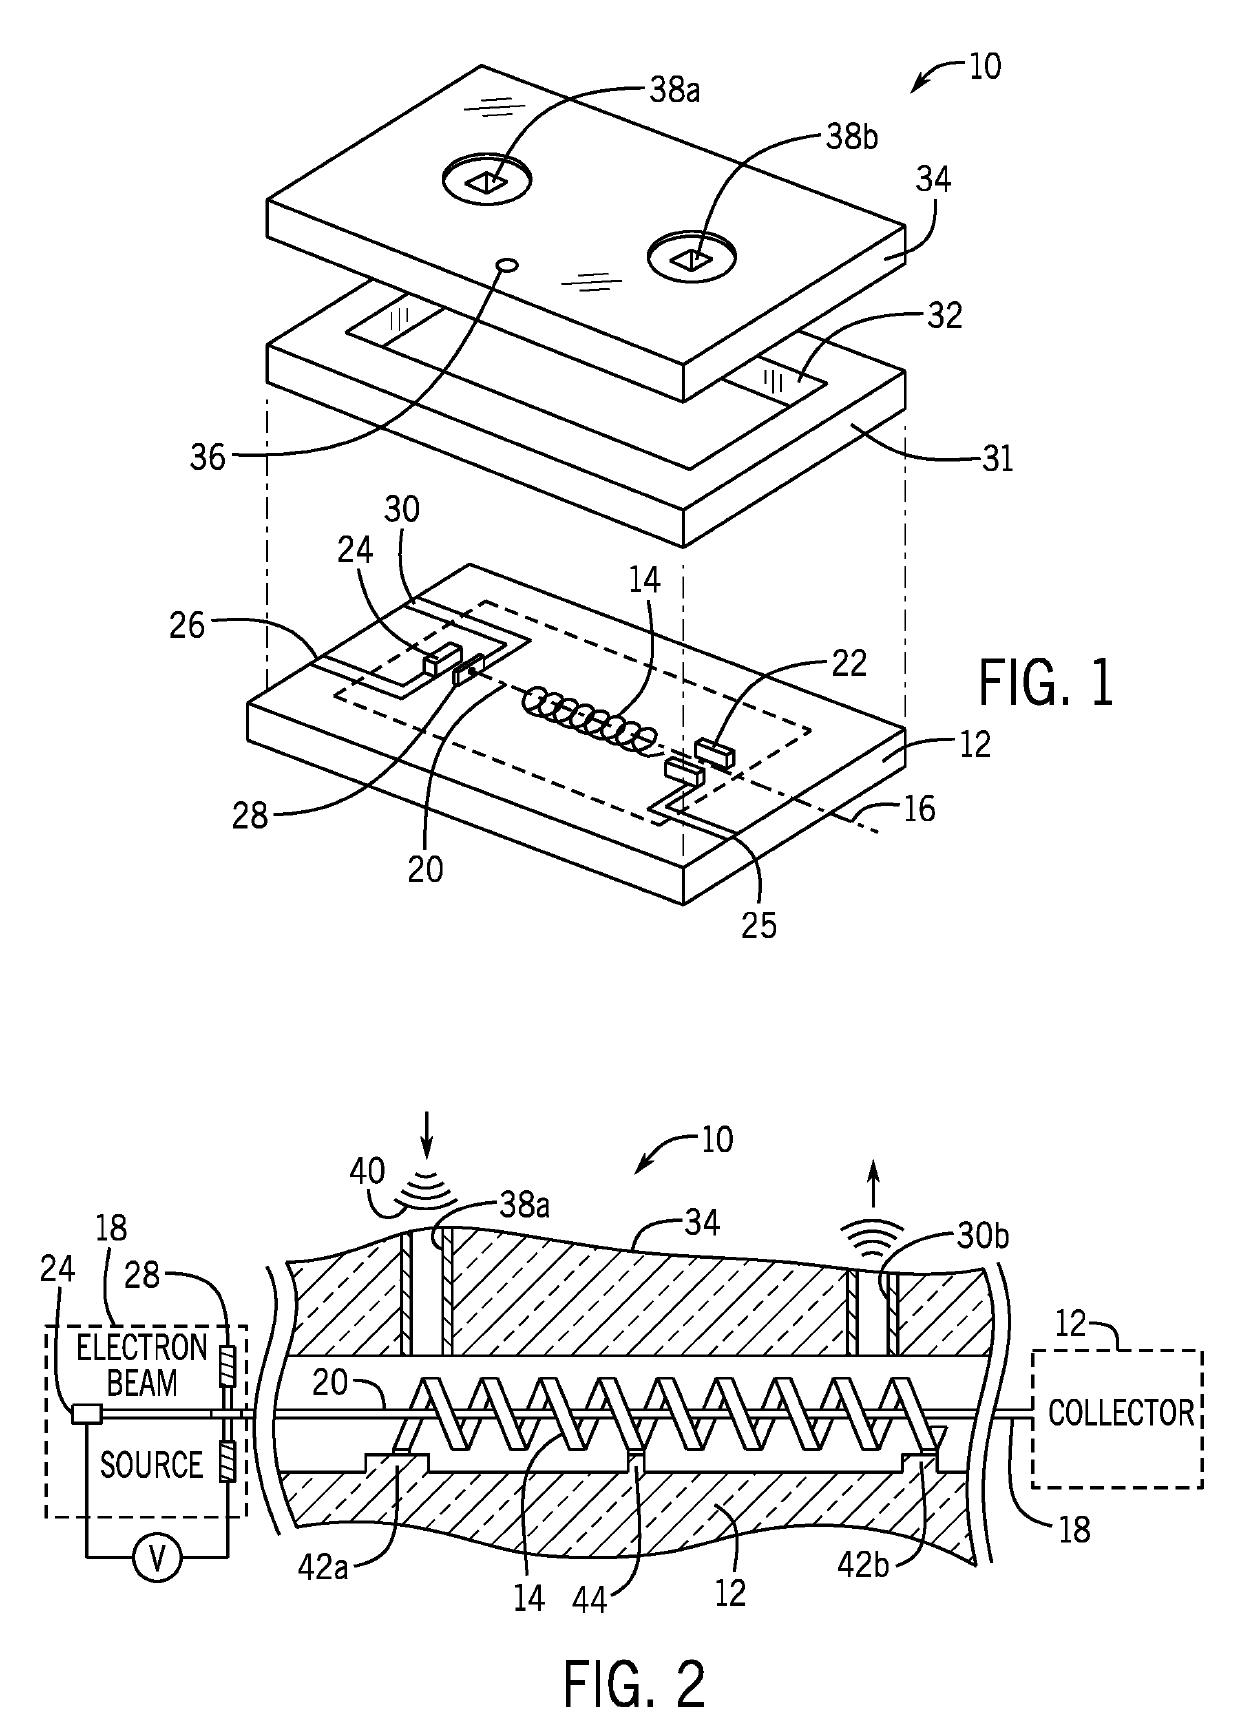 High-Frequency Vacuum Electronic Device